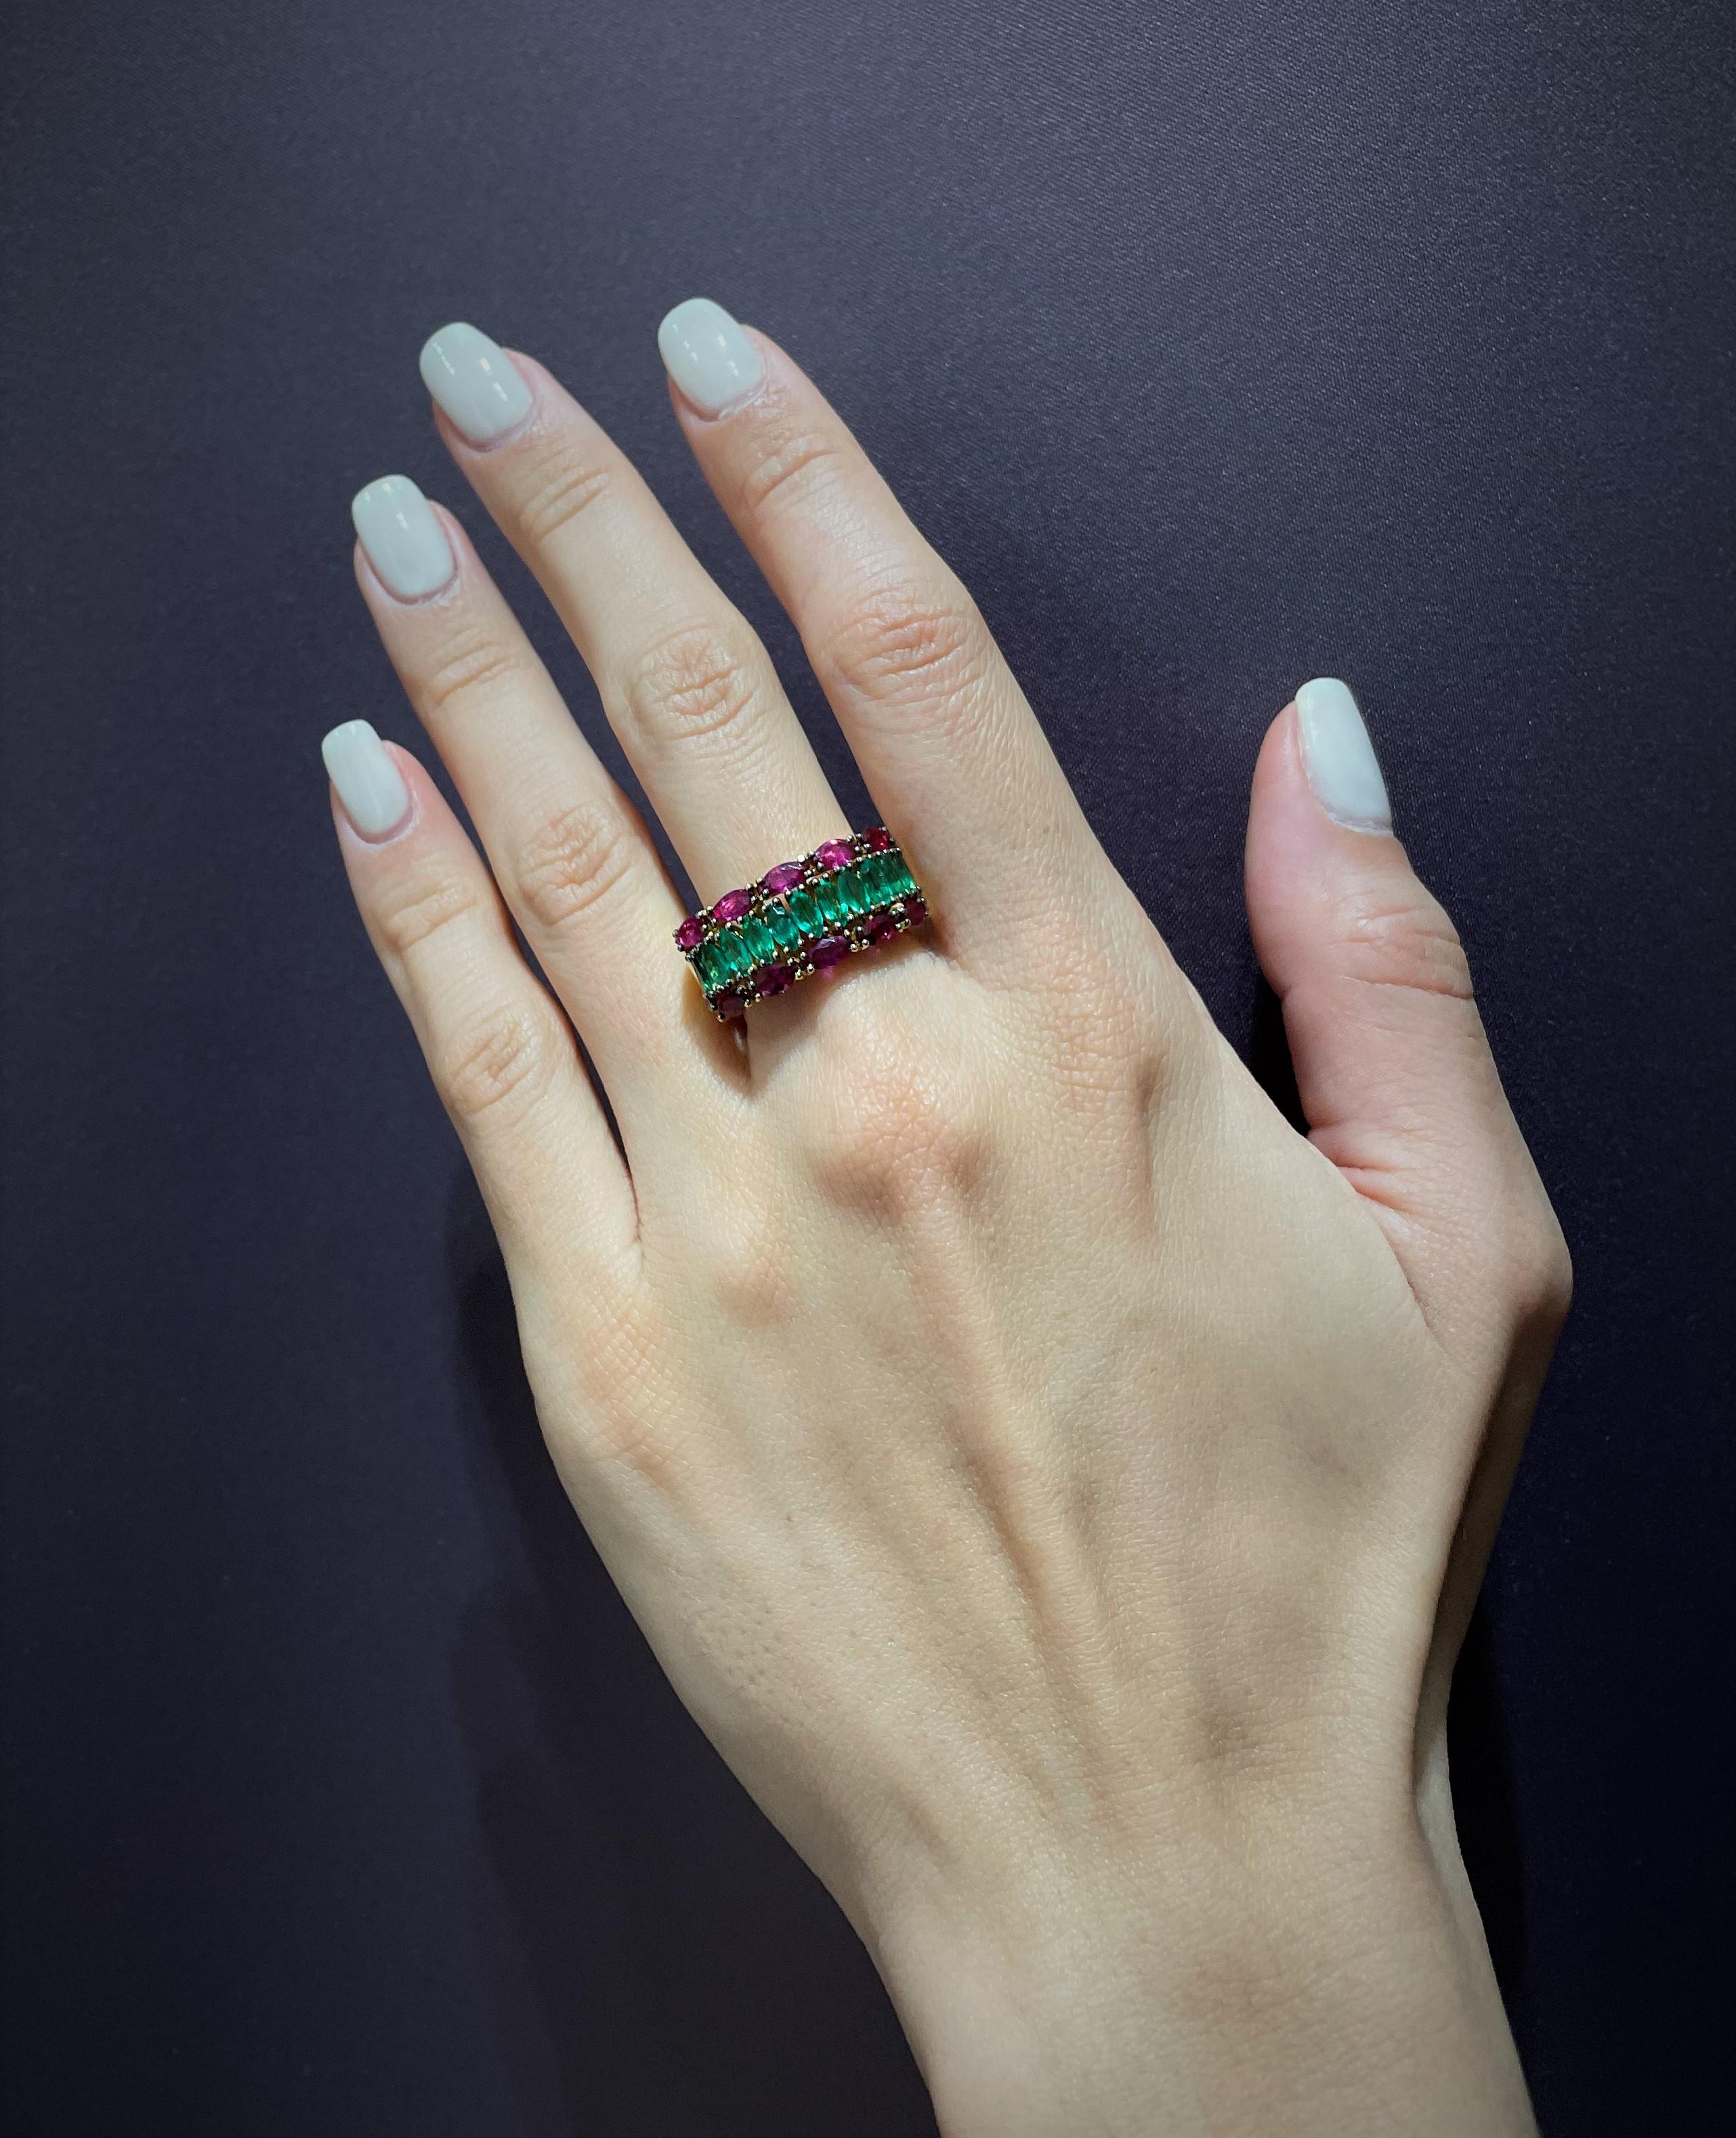 Contemporary Cocktail Ring set in Yellow Gold with:
- 11 Marquise Cut Emeralds with 1,25 ct;
- 10 Marquise Cut Rubies with 1,81 ct;
Unique Piece accompanied with its own Certificate of Authenticity.
Stamped by the Portuguese Assay Office as 19,2k